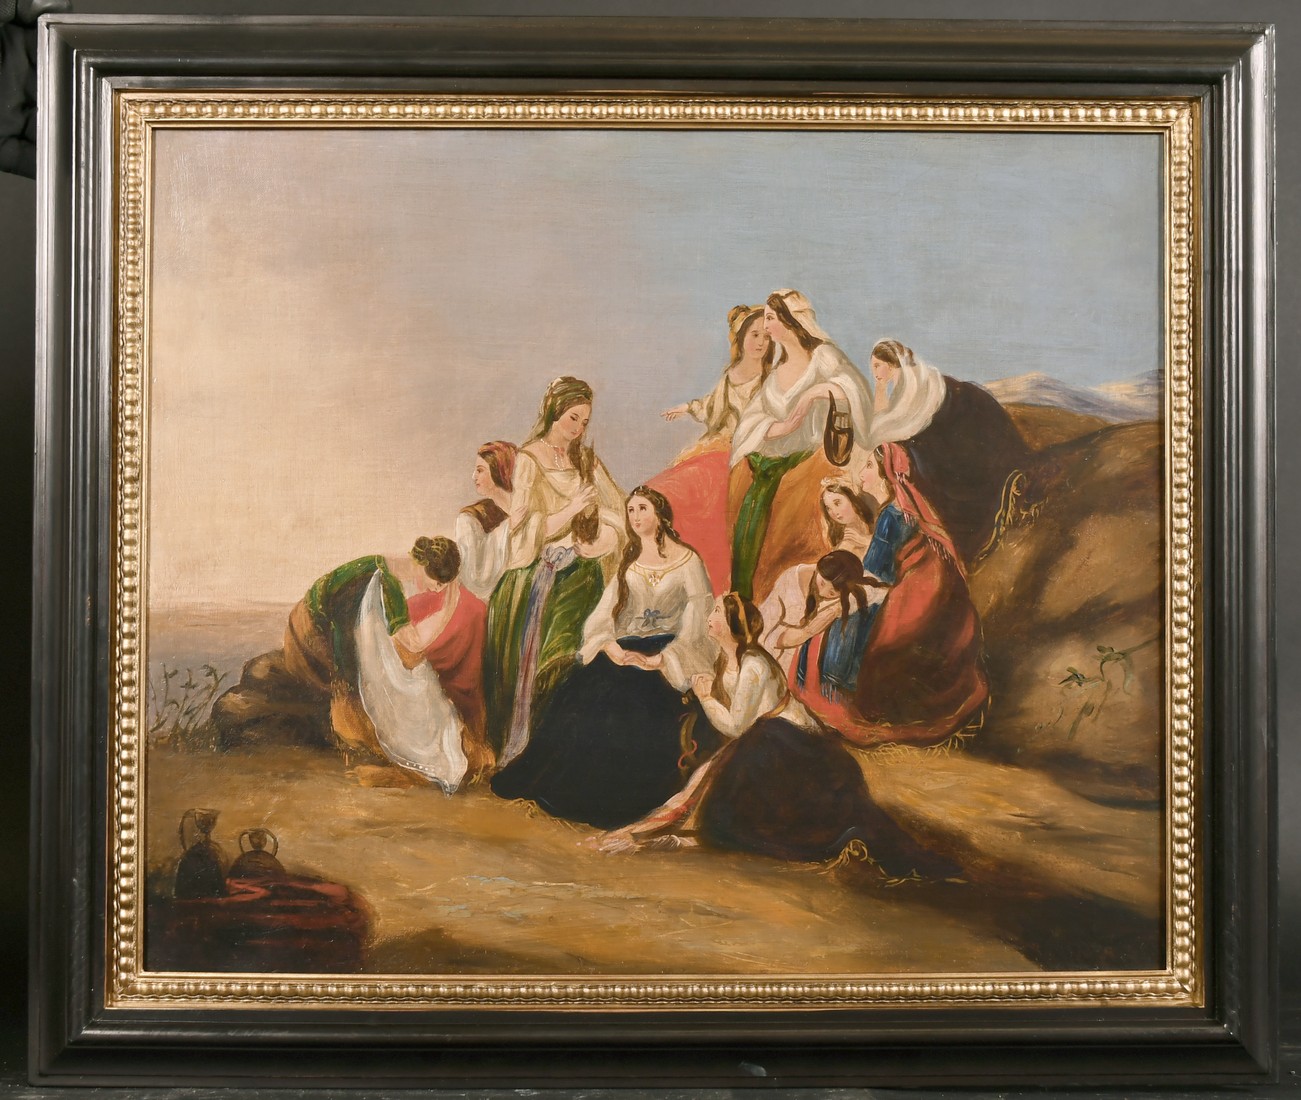 Late 19th century, A scene of female figures gathered on a rocky hillside, oil on canvas, 20" x - Image 2 of 3